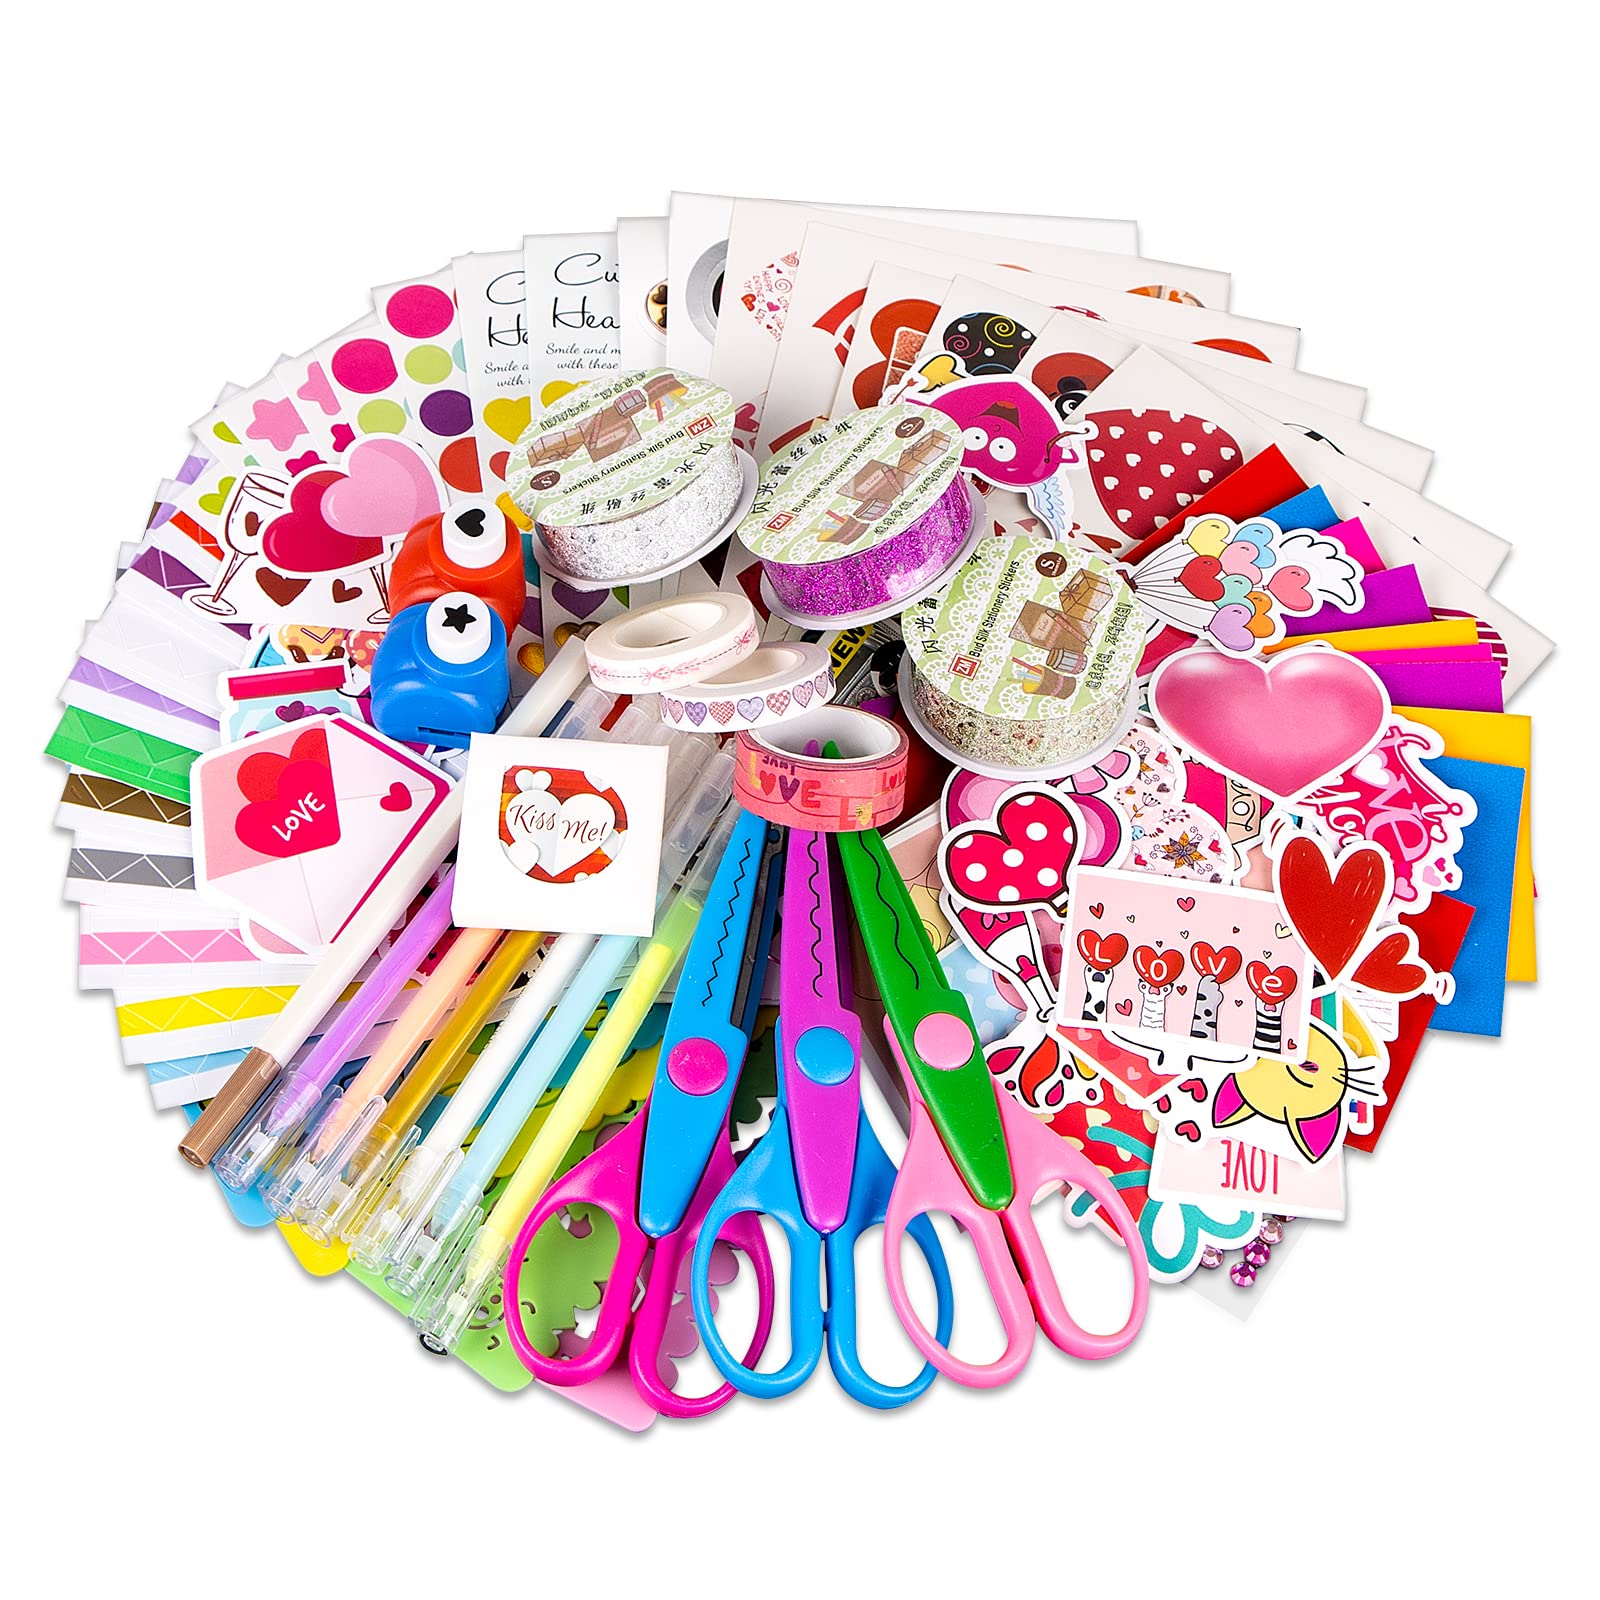 SICOHOME Scrapbooking Supplies Kit,Valentine's Day Scrapbooking Kit,Love  Heart Sticker for Kids Adults,Love Craft Kit for Scrapbook Card Making  Diary Planner Journal Classroom Craft Project